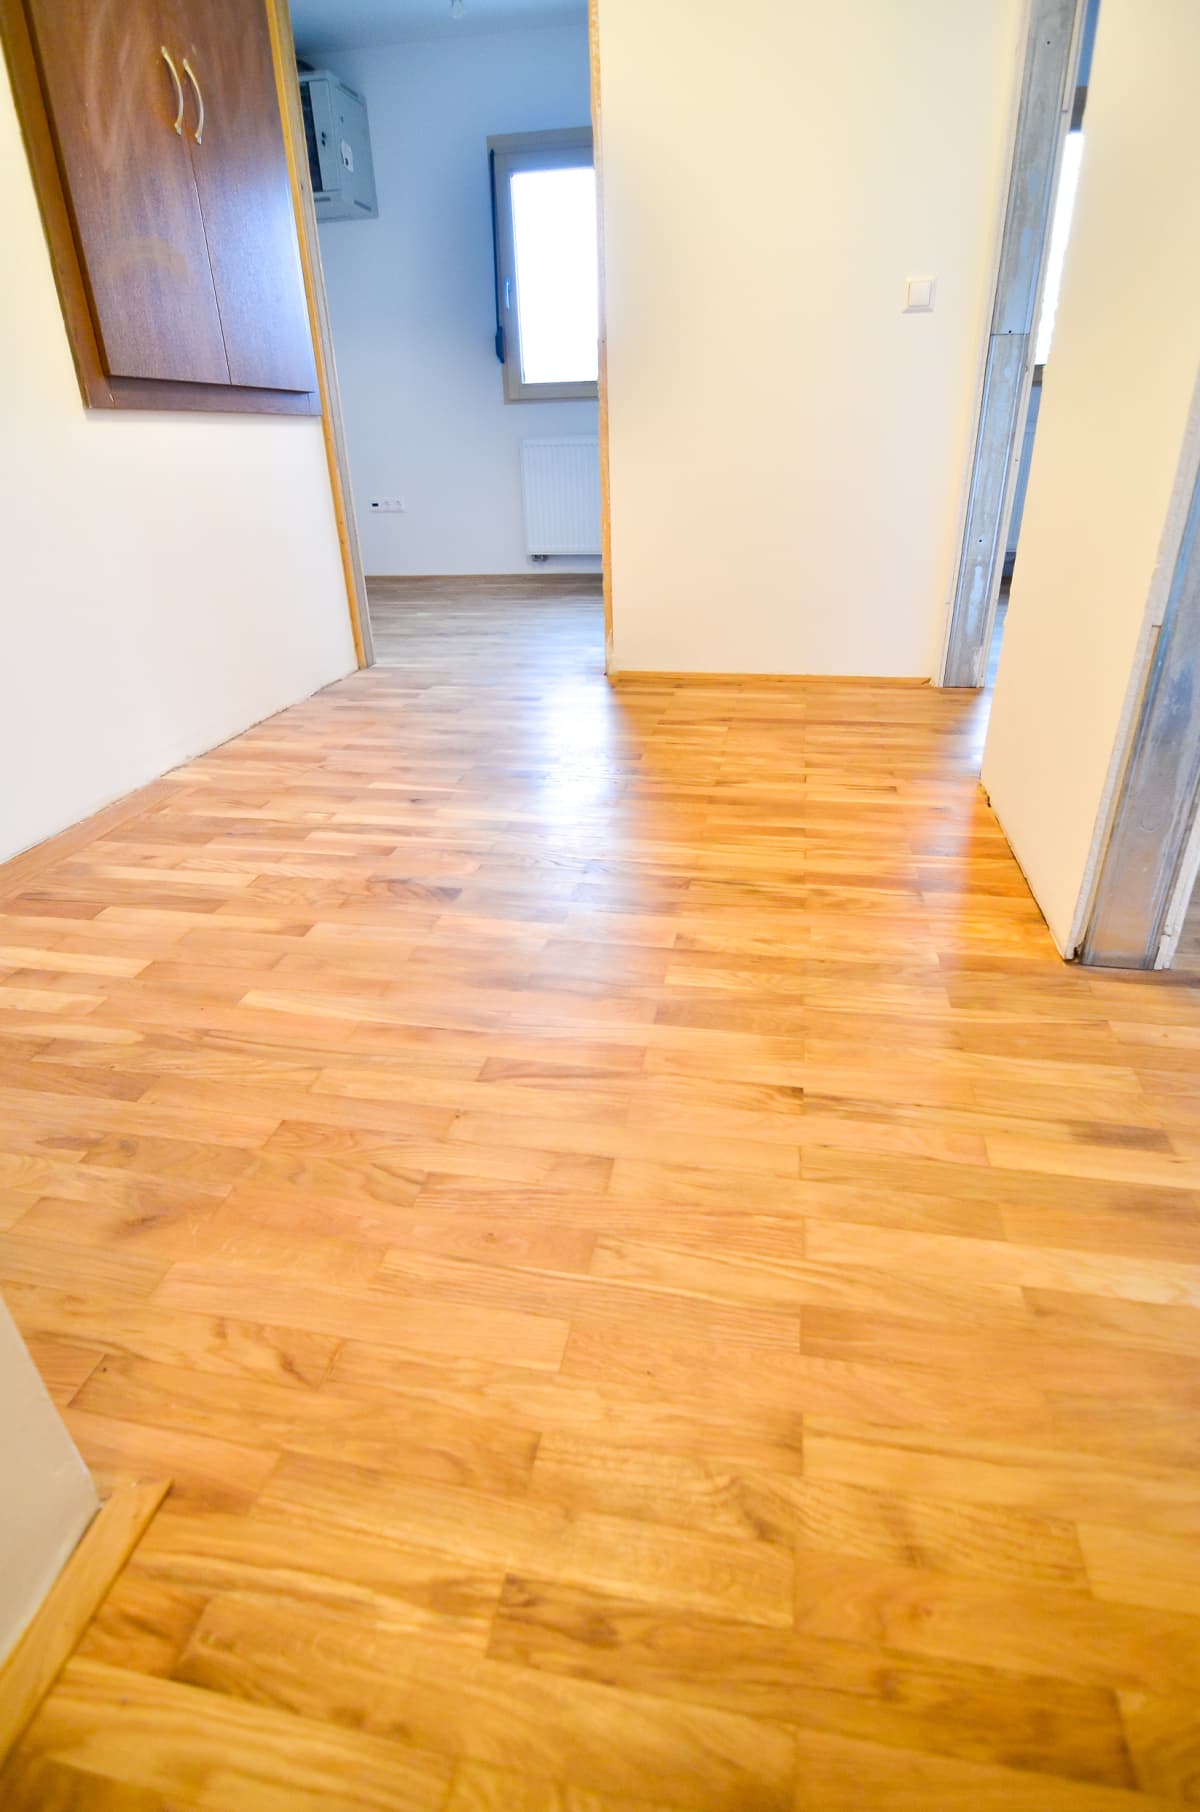 Renovating apartment with parquet wooden hard floor